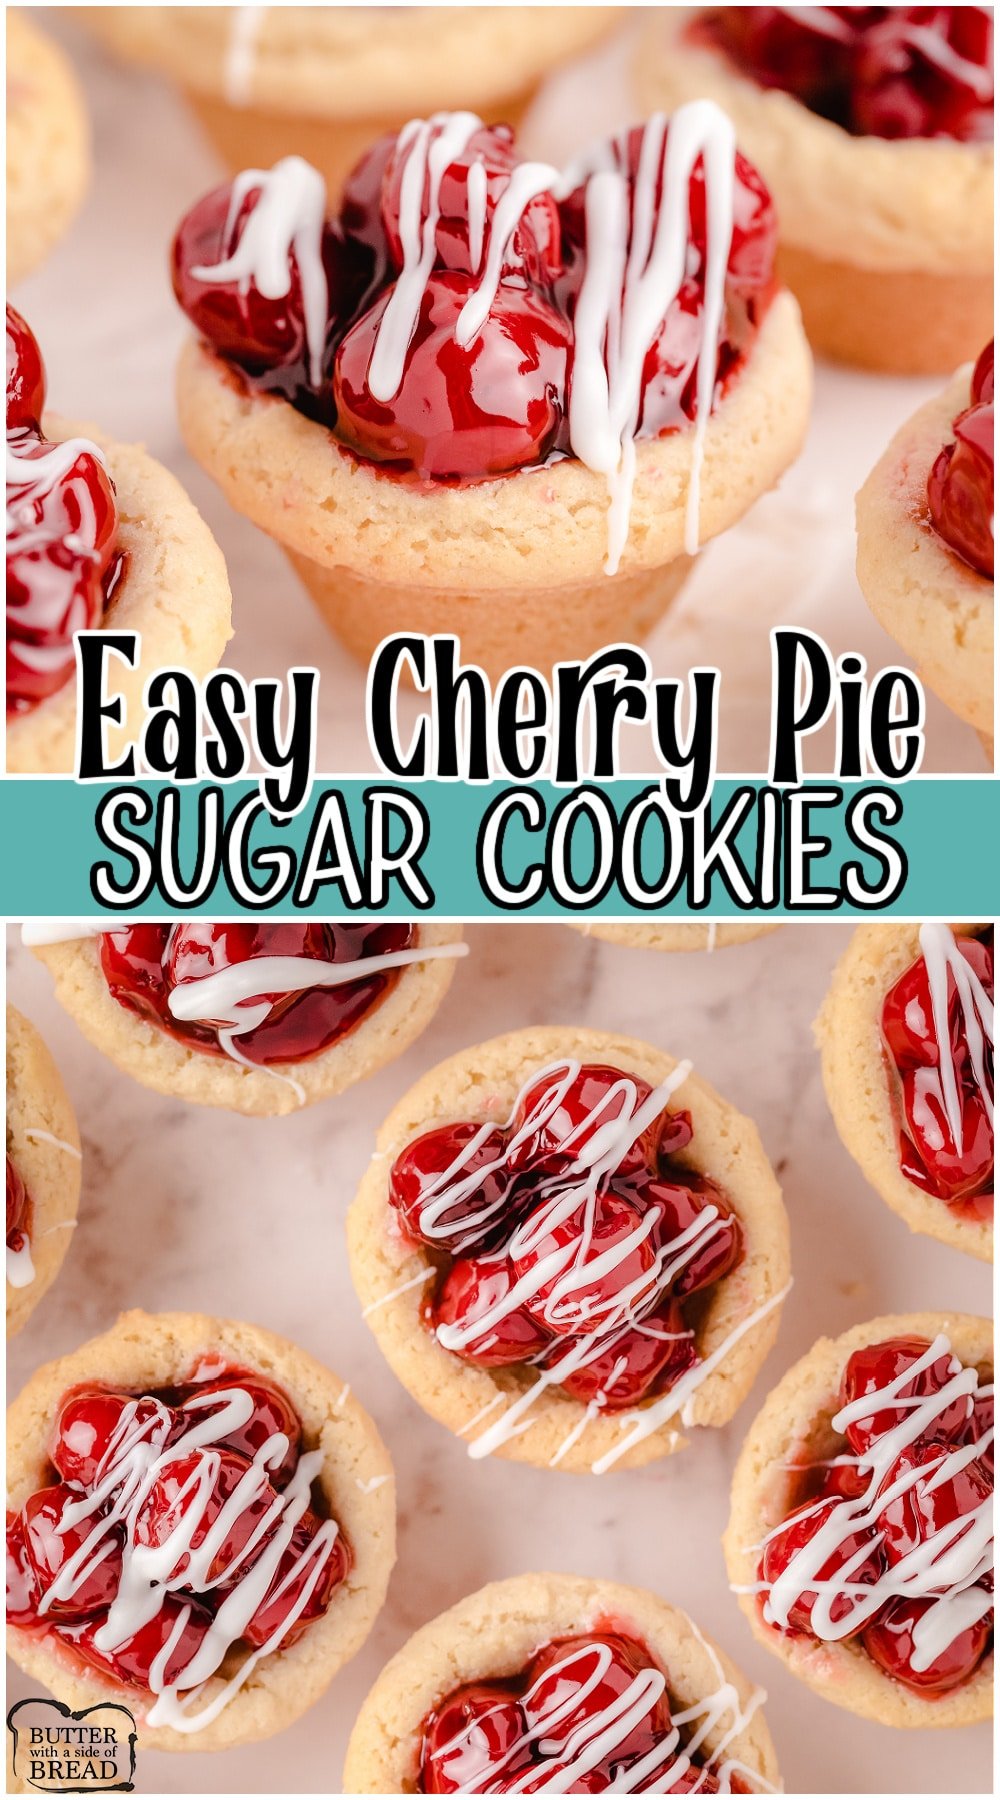 Cherry pie cookies are a delicious cherry pie filled sugar cookie cup covered in a white chocolate drizzle. They’re soft, sweet, and a delicious way to satisfy your cherry pie cravings.